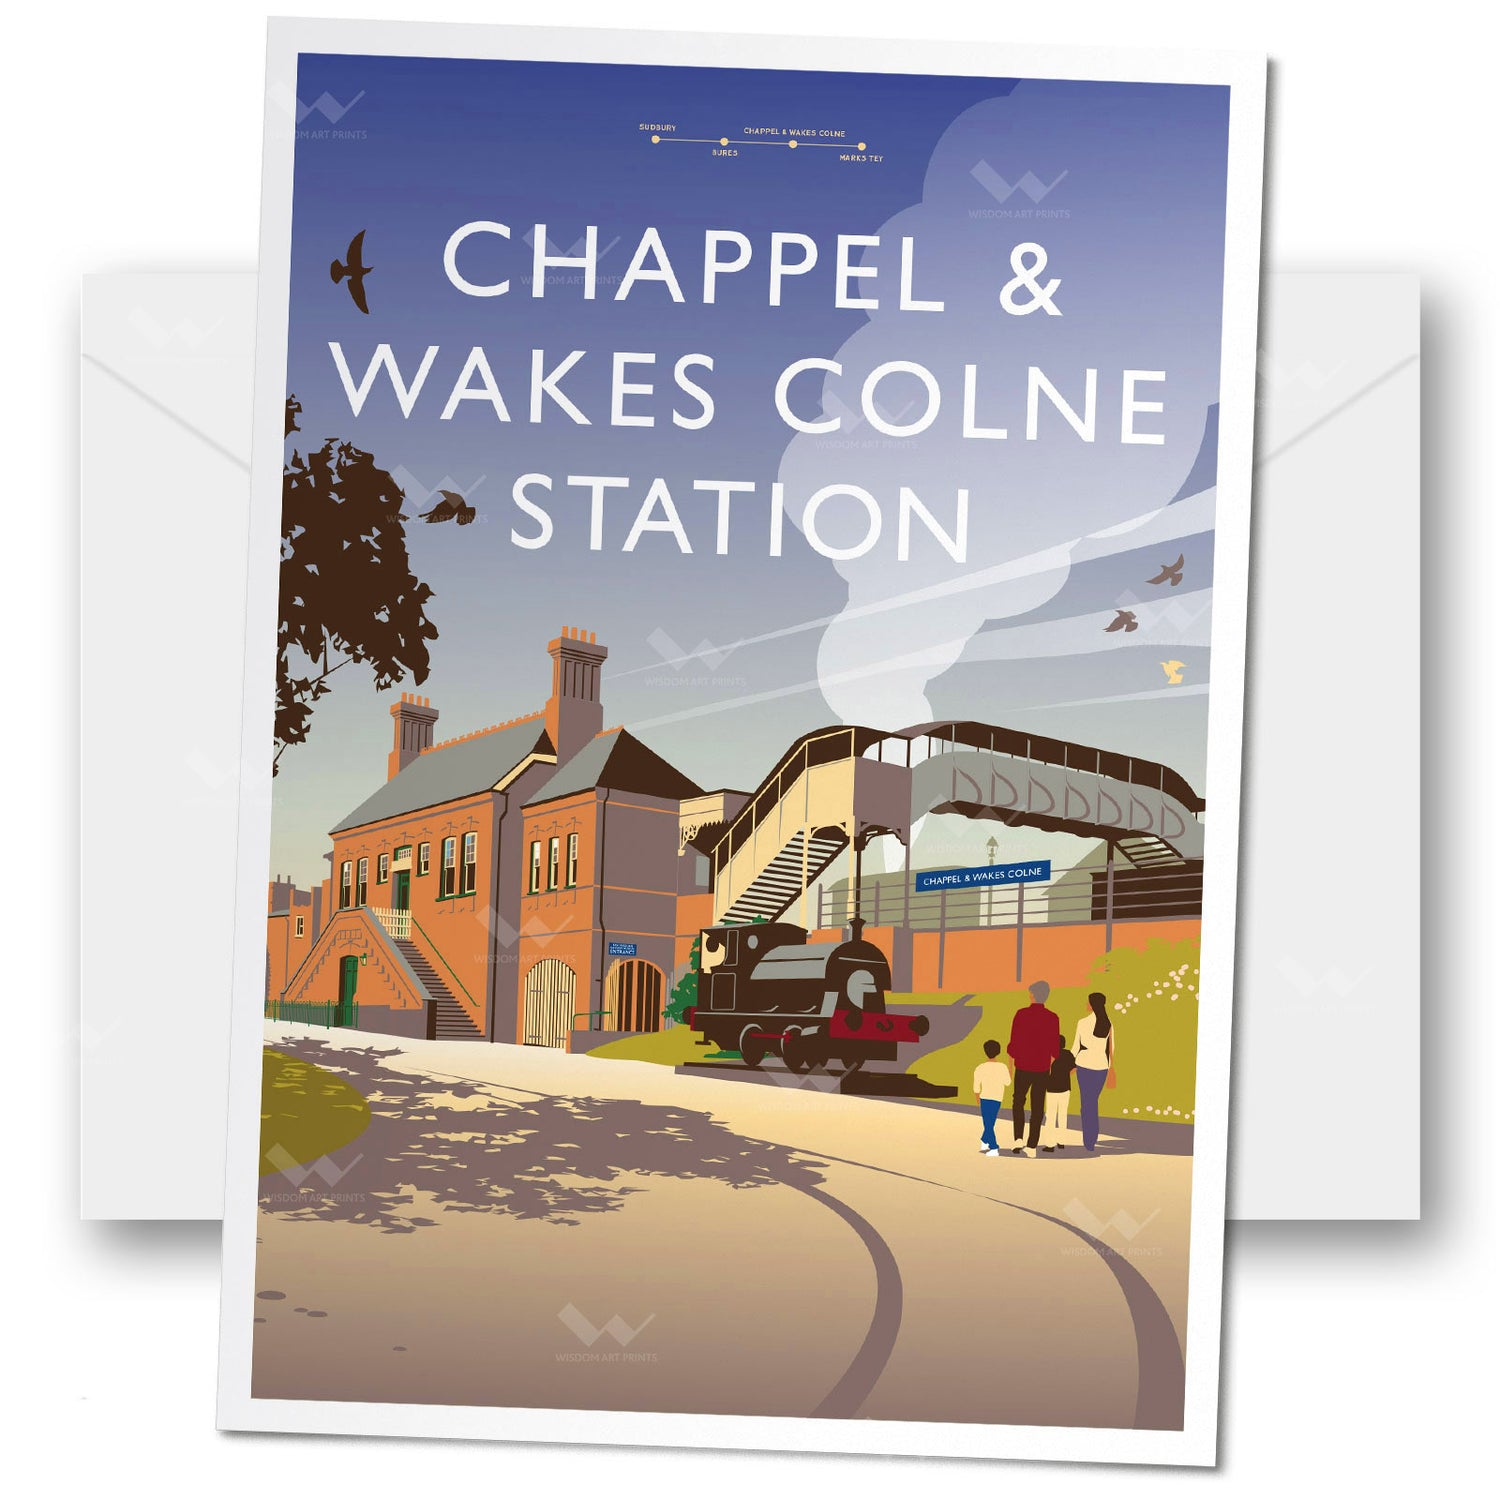 Chappel & Wakes Colne Greeting Card